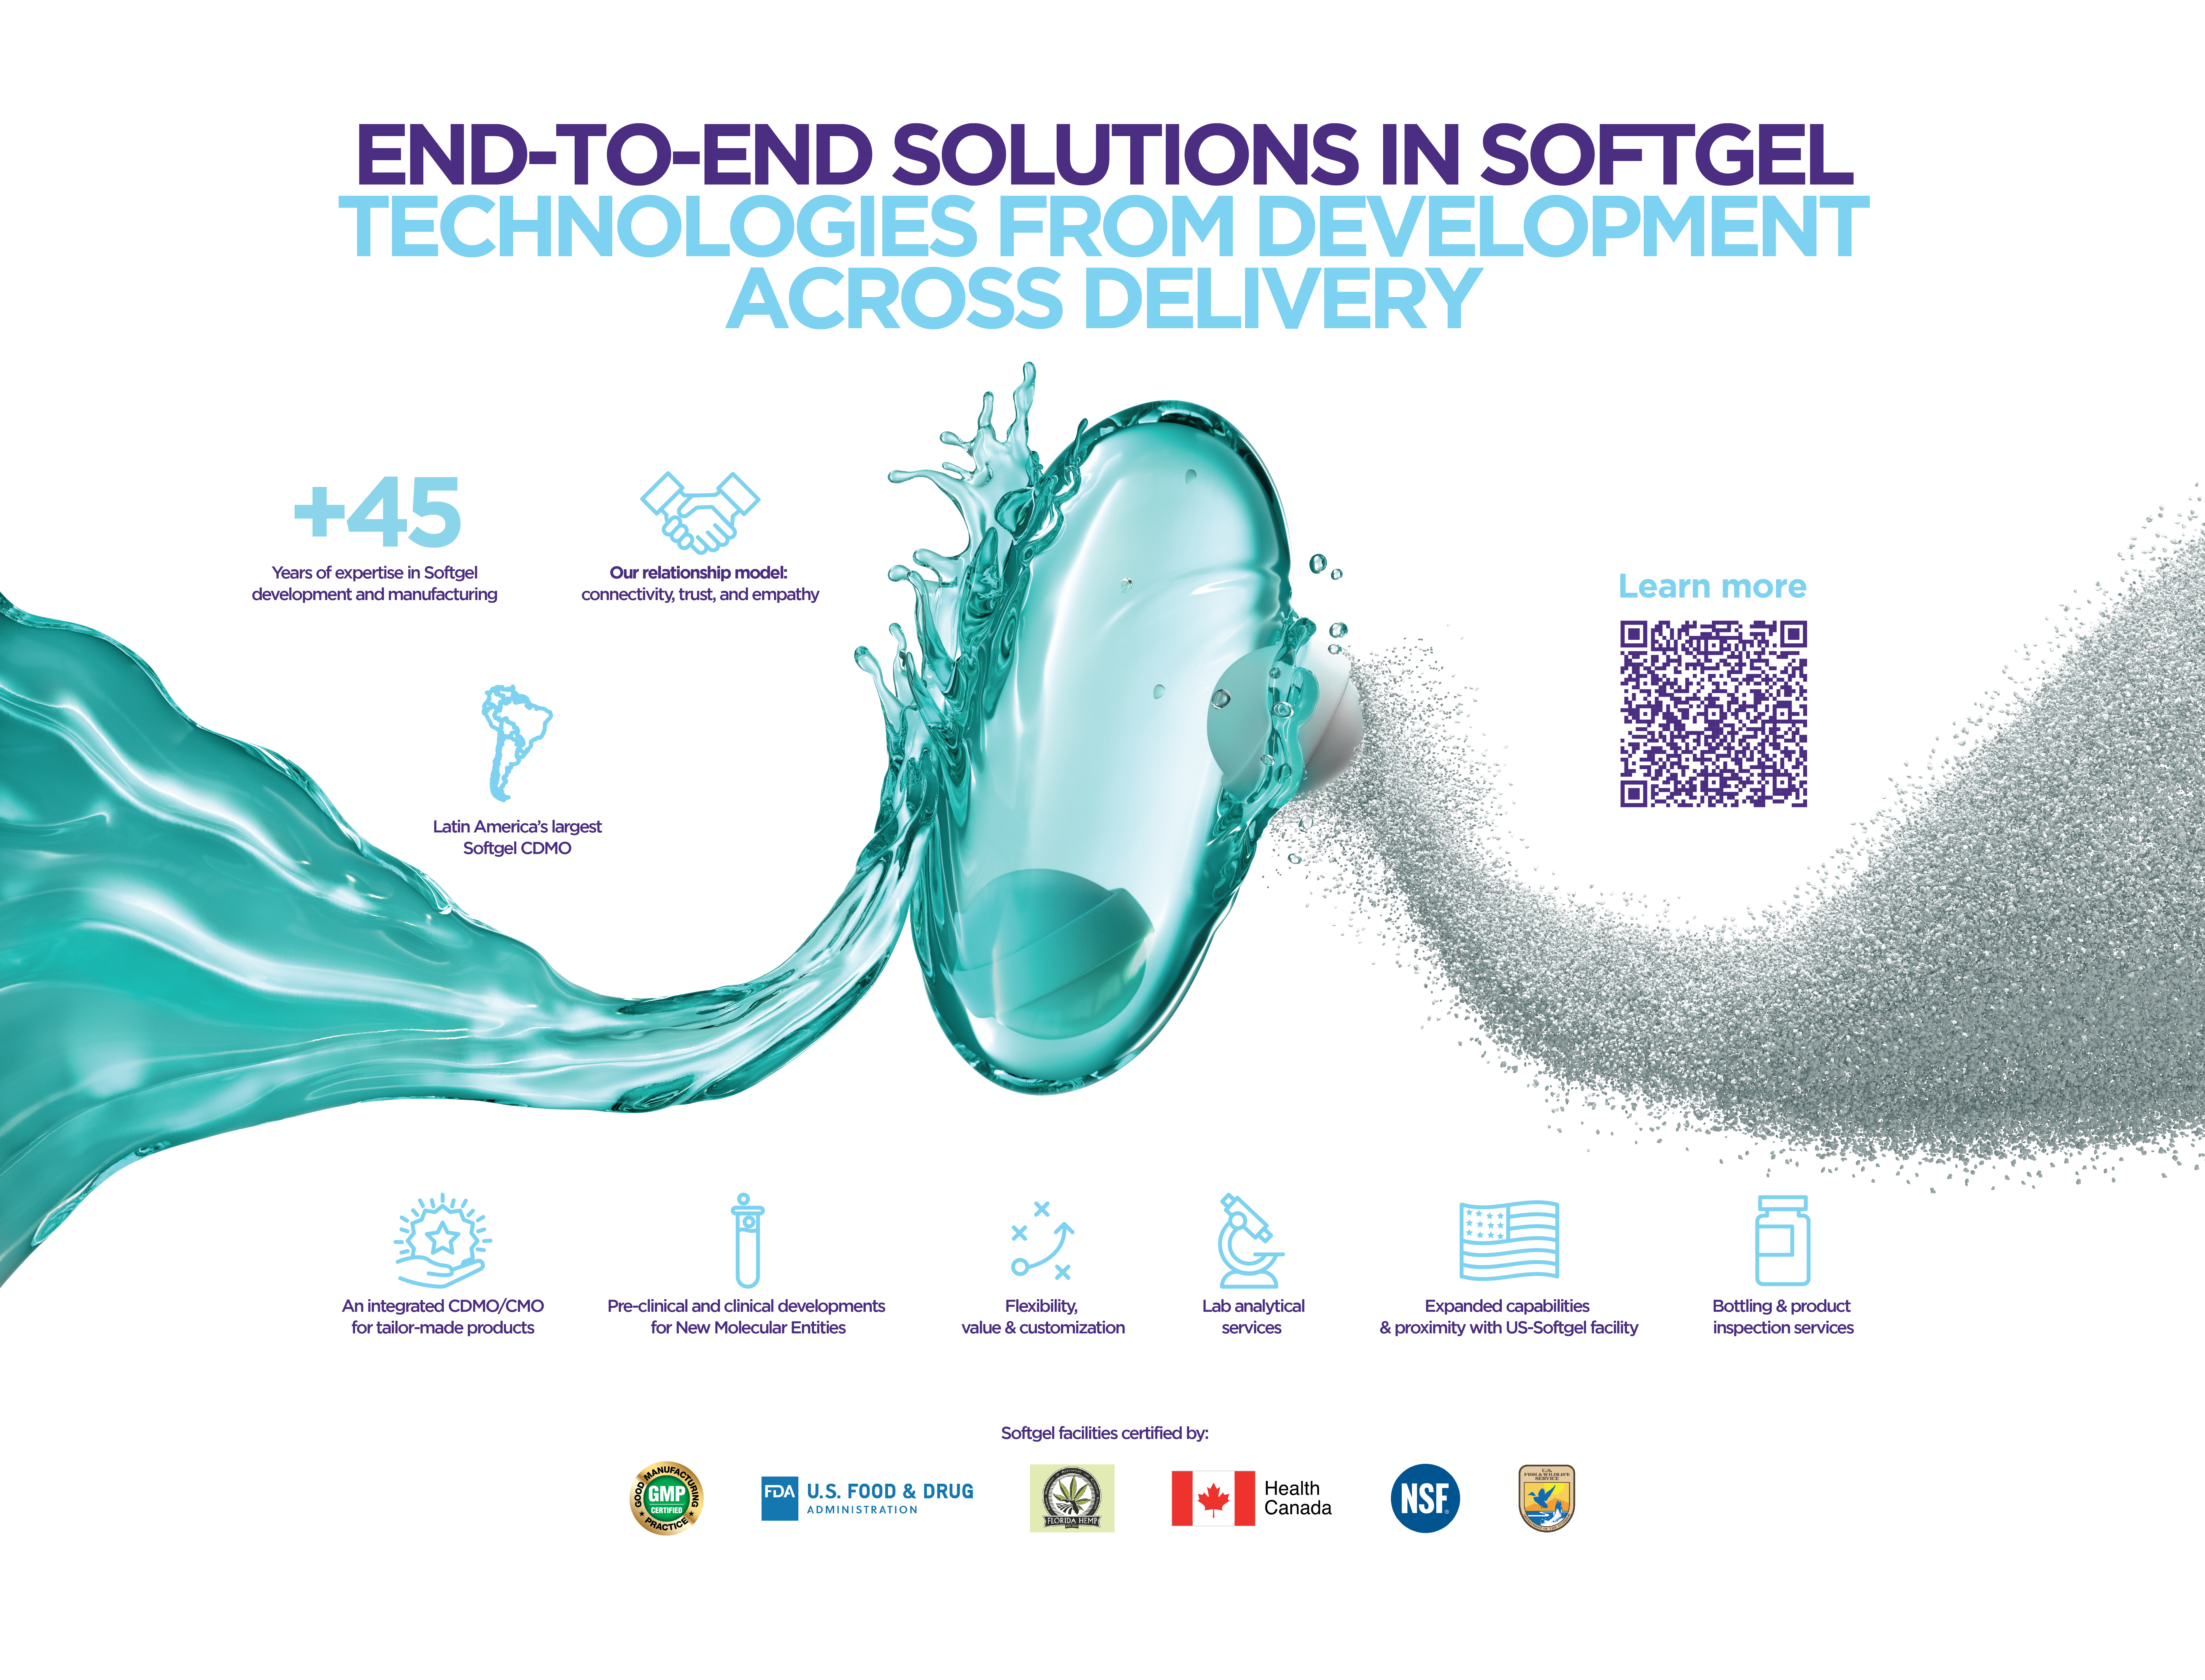 Flexibility & Innovation in Softgel Delivery: Sofgen Pharmaceuticals